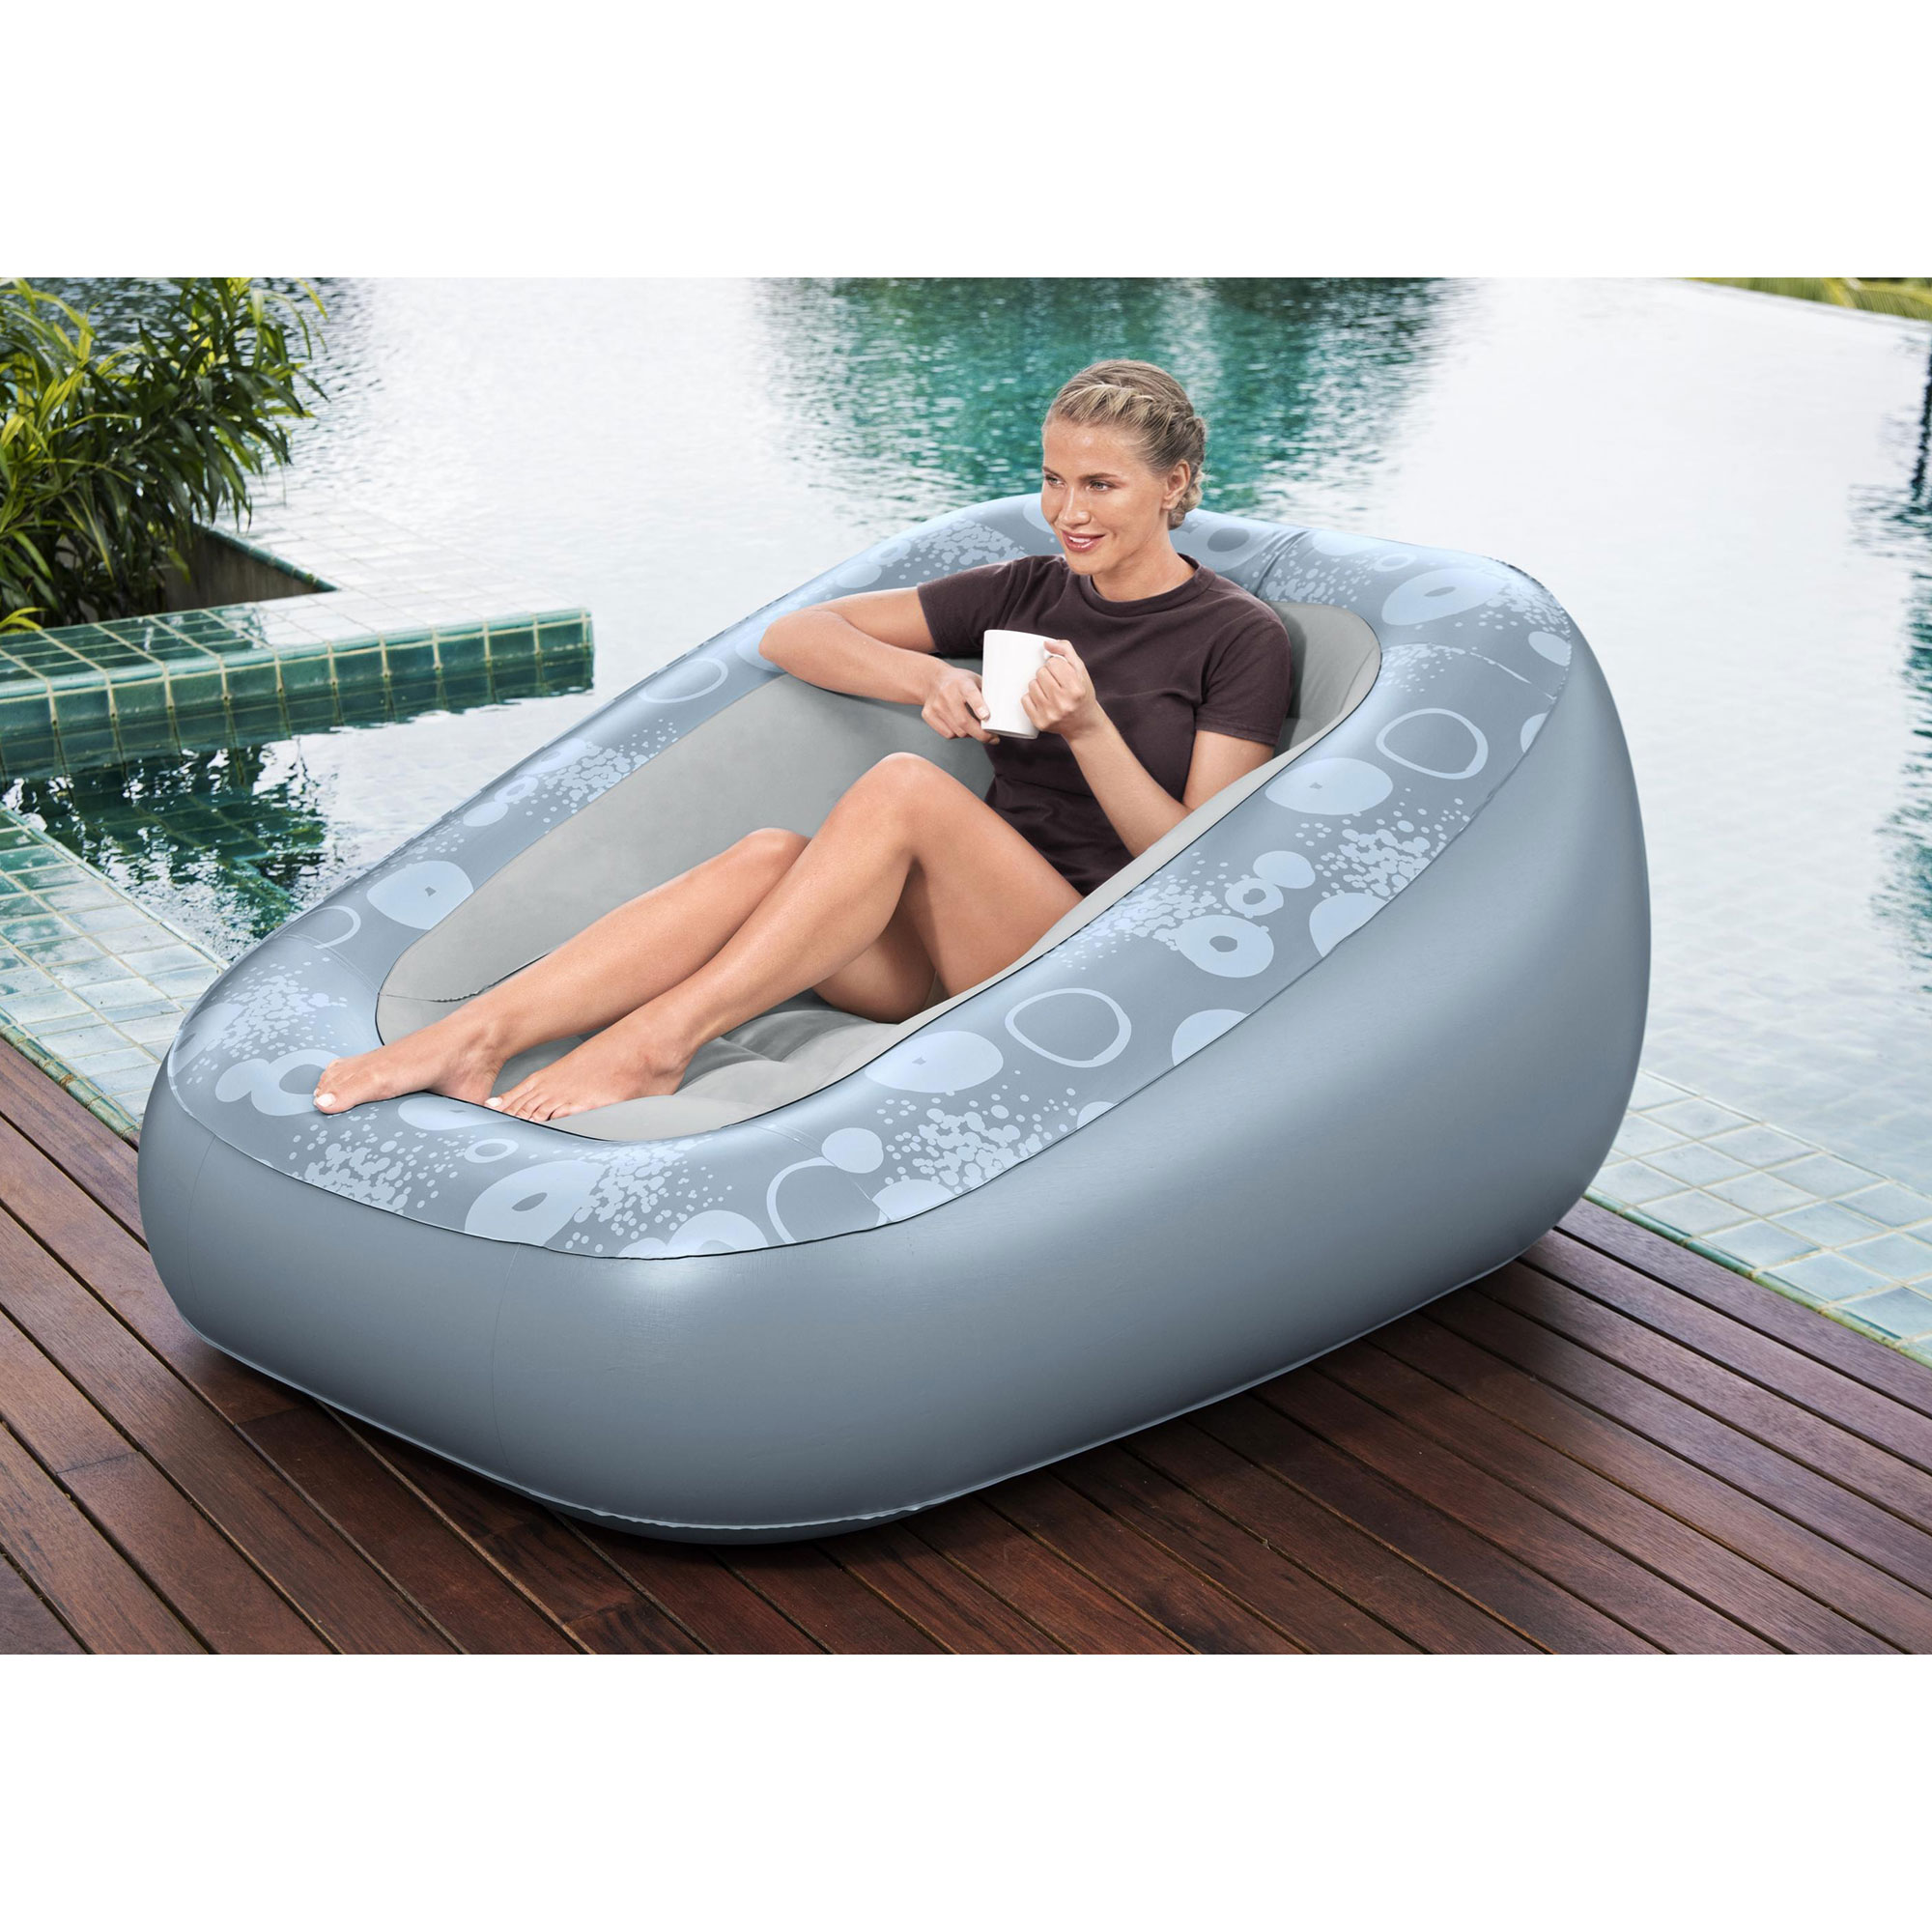 Bestway Comfi Cube Deluxe Inflatable Indoor Gaming Lounger Chair